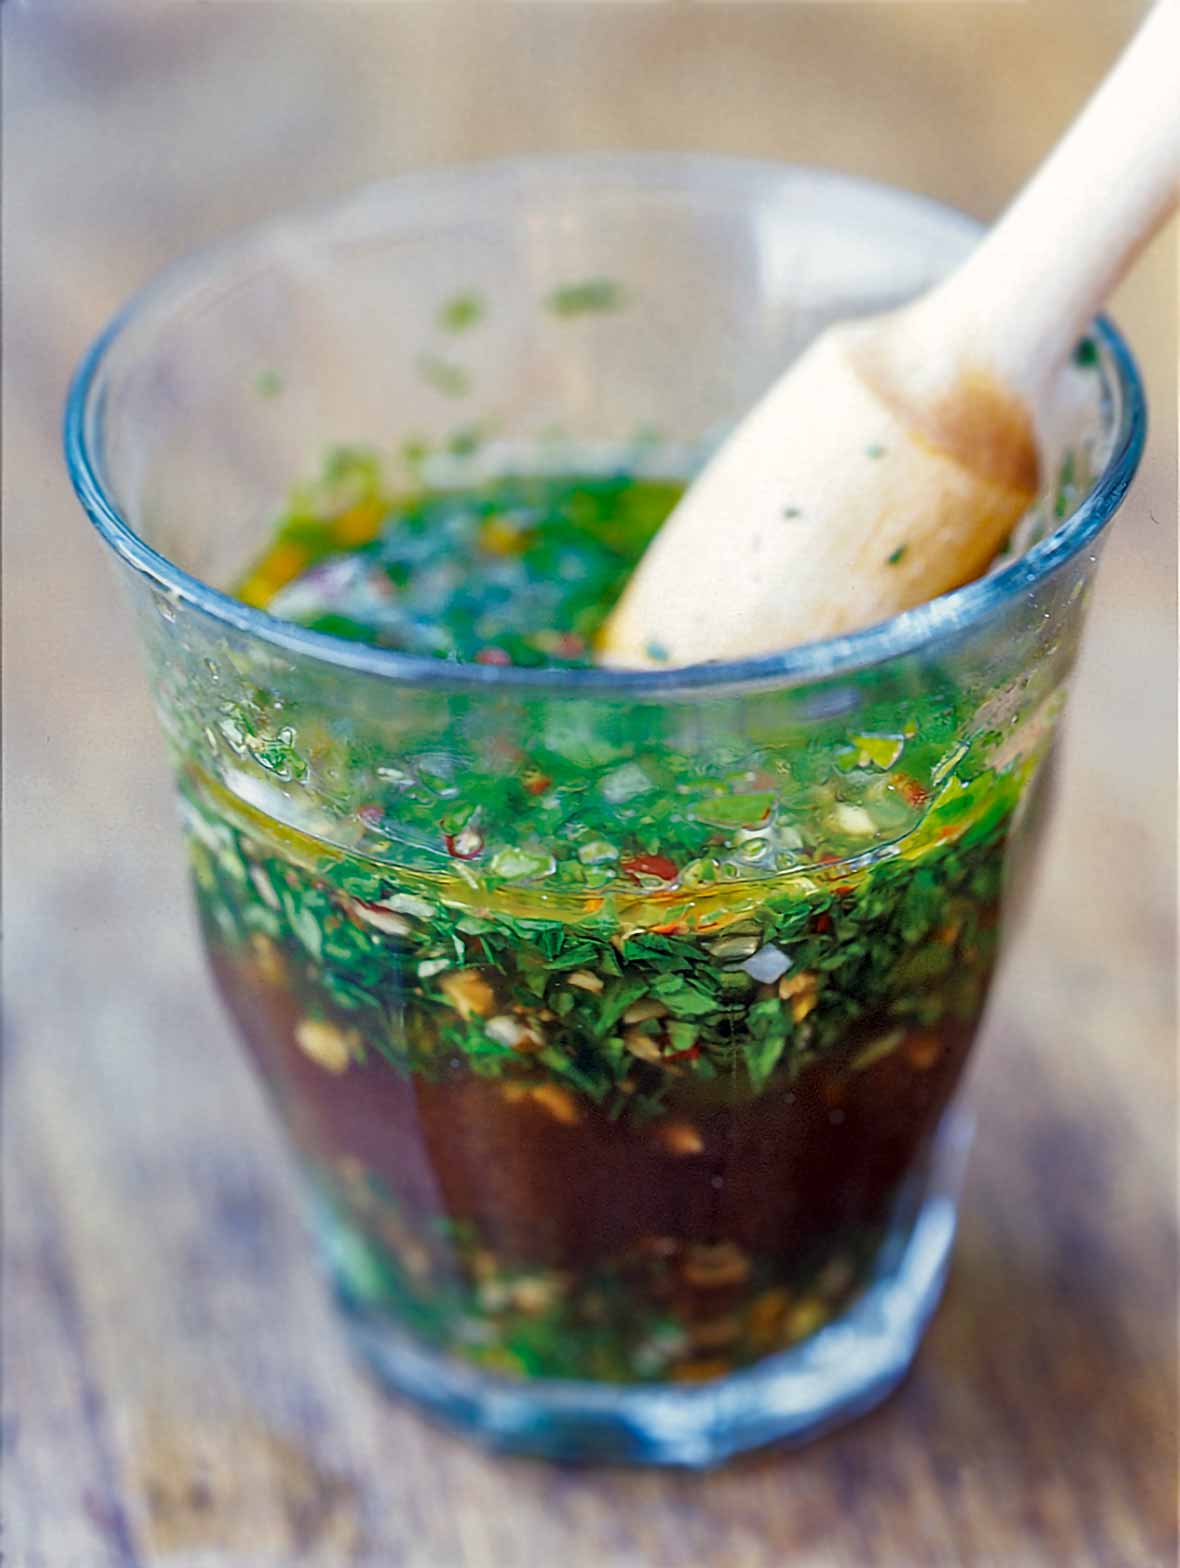 A glass full of chimichurri--an Argentine steak sauce--made with vinegar, olive oil, parsley, oregano, garlic, red pepper flakes